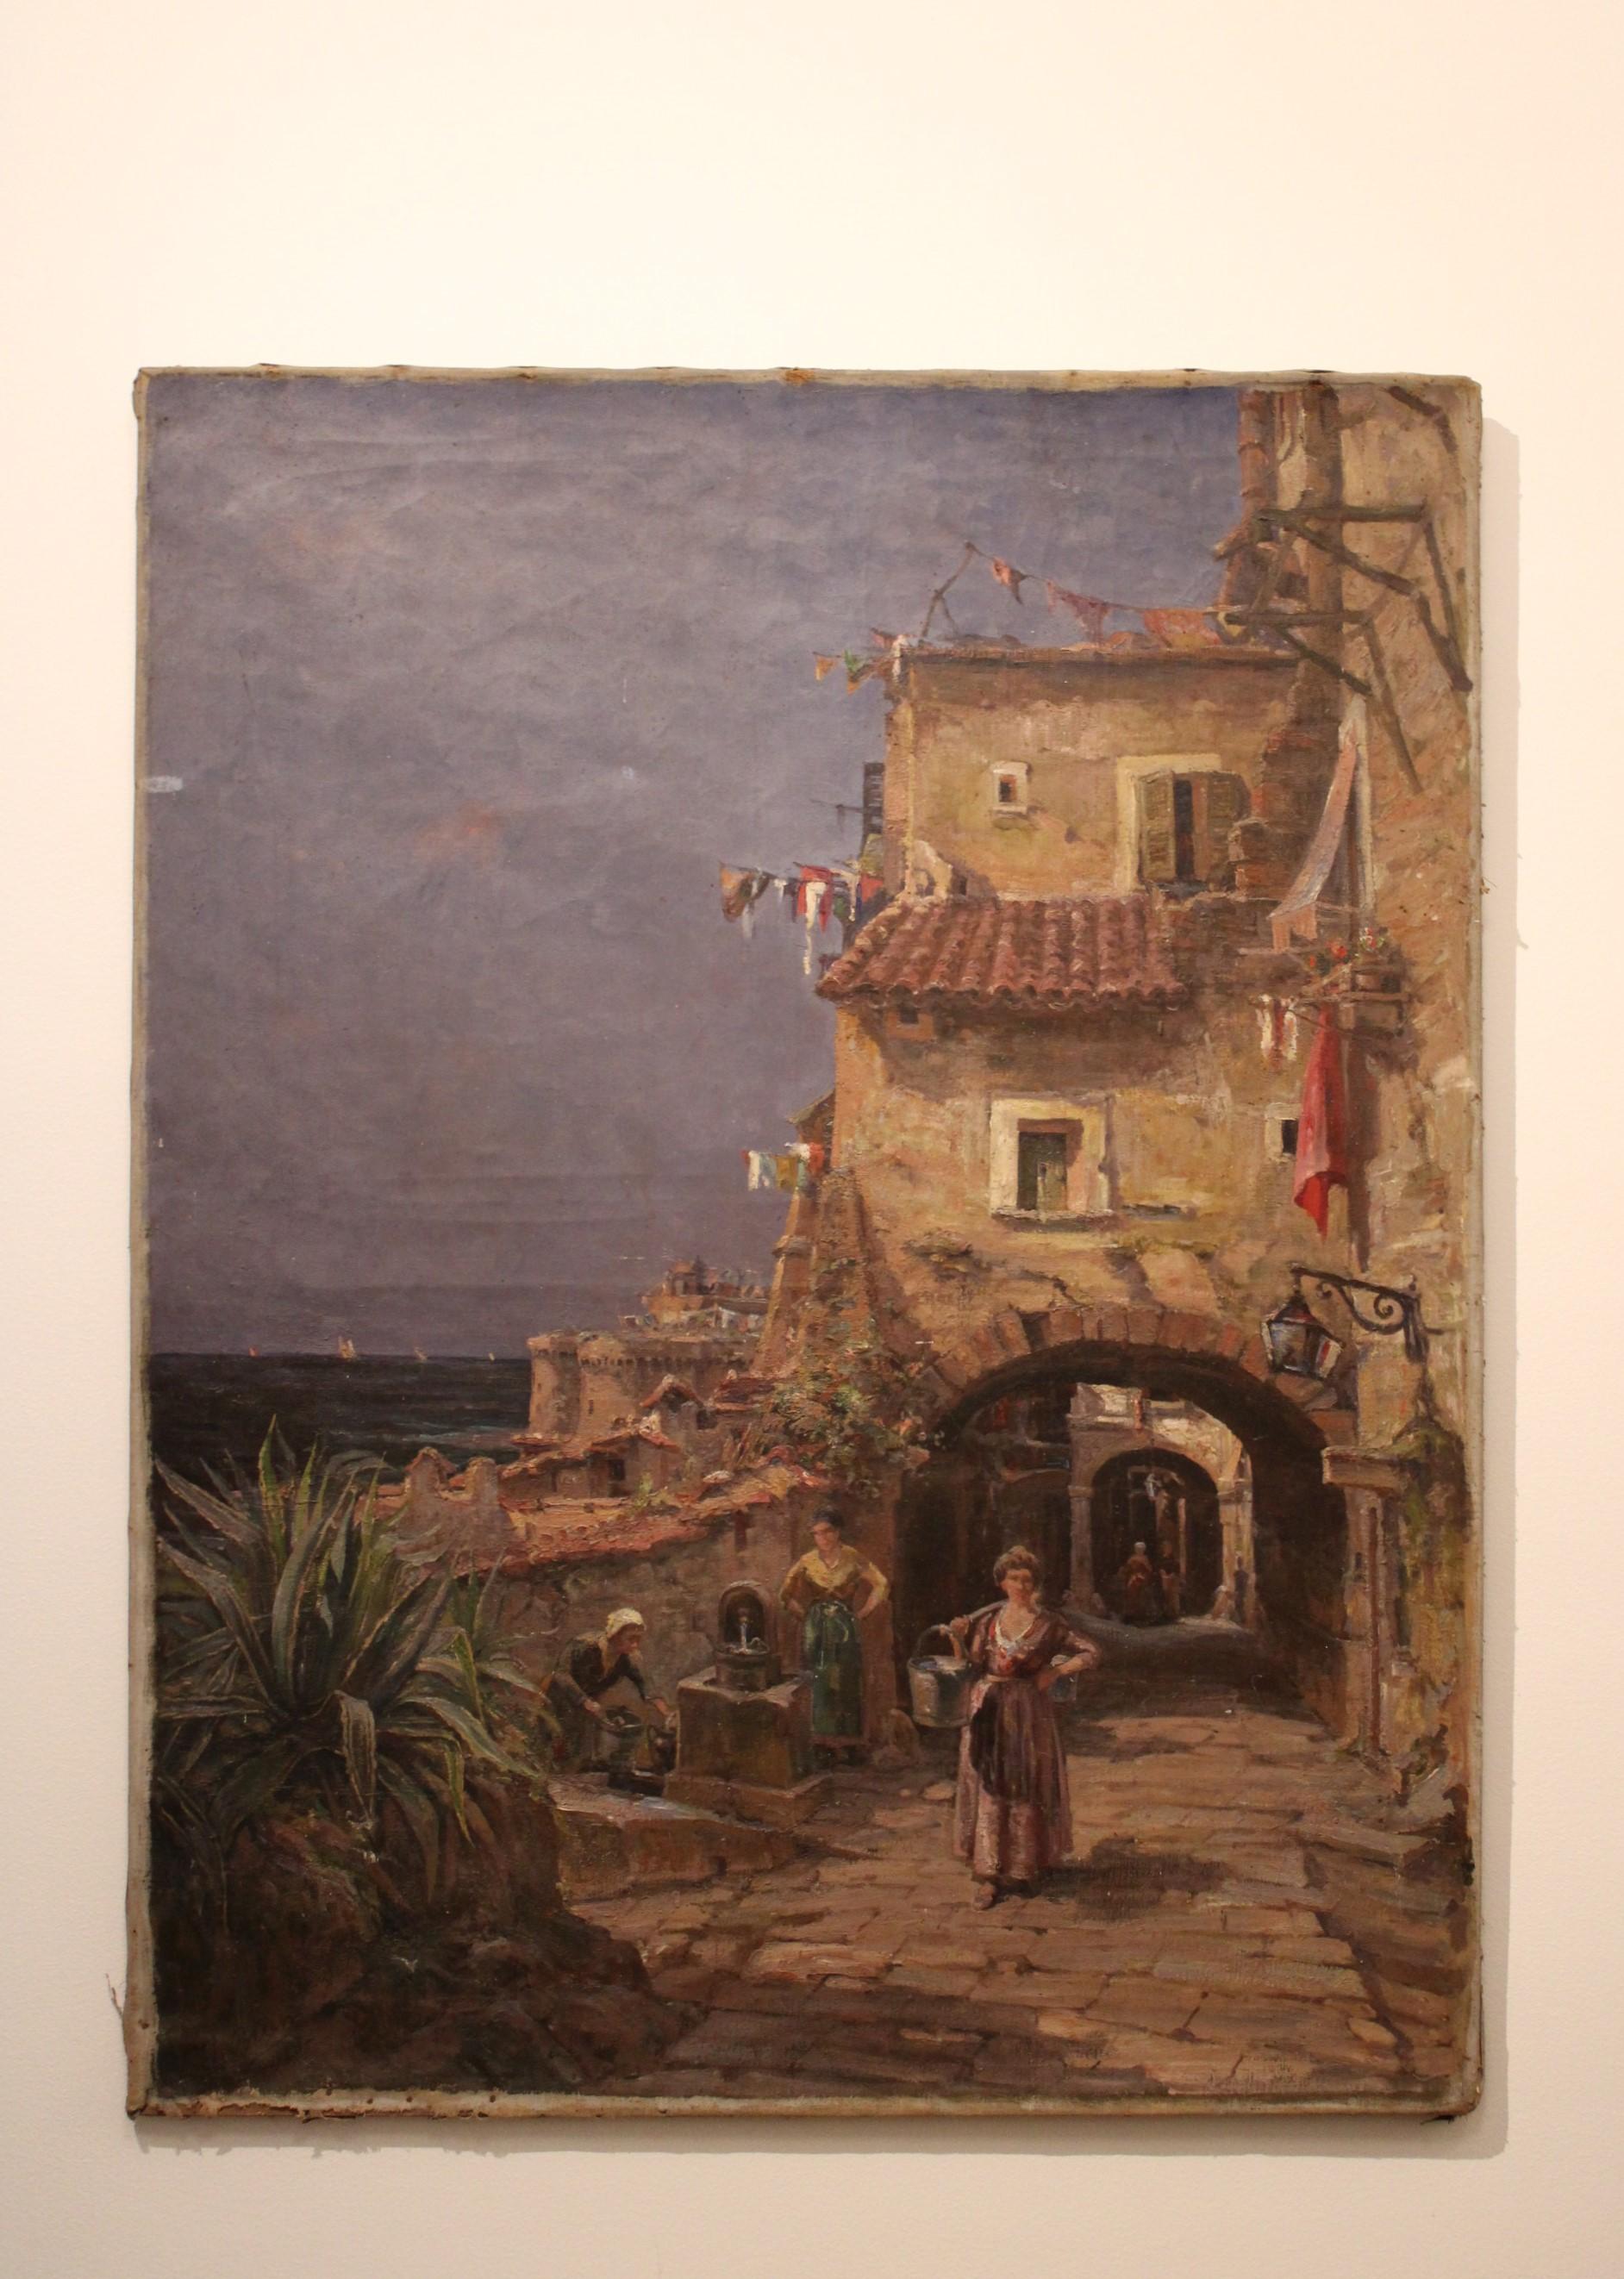 Painting by the French painter Jules Félix Brien (1871-1945)
Oil on canvas 
Village in the south of France
Signed J.Brien and dated 1920

Some damages (see photos details).